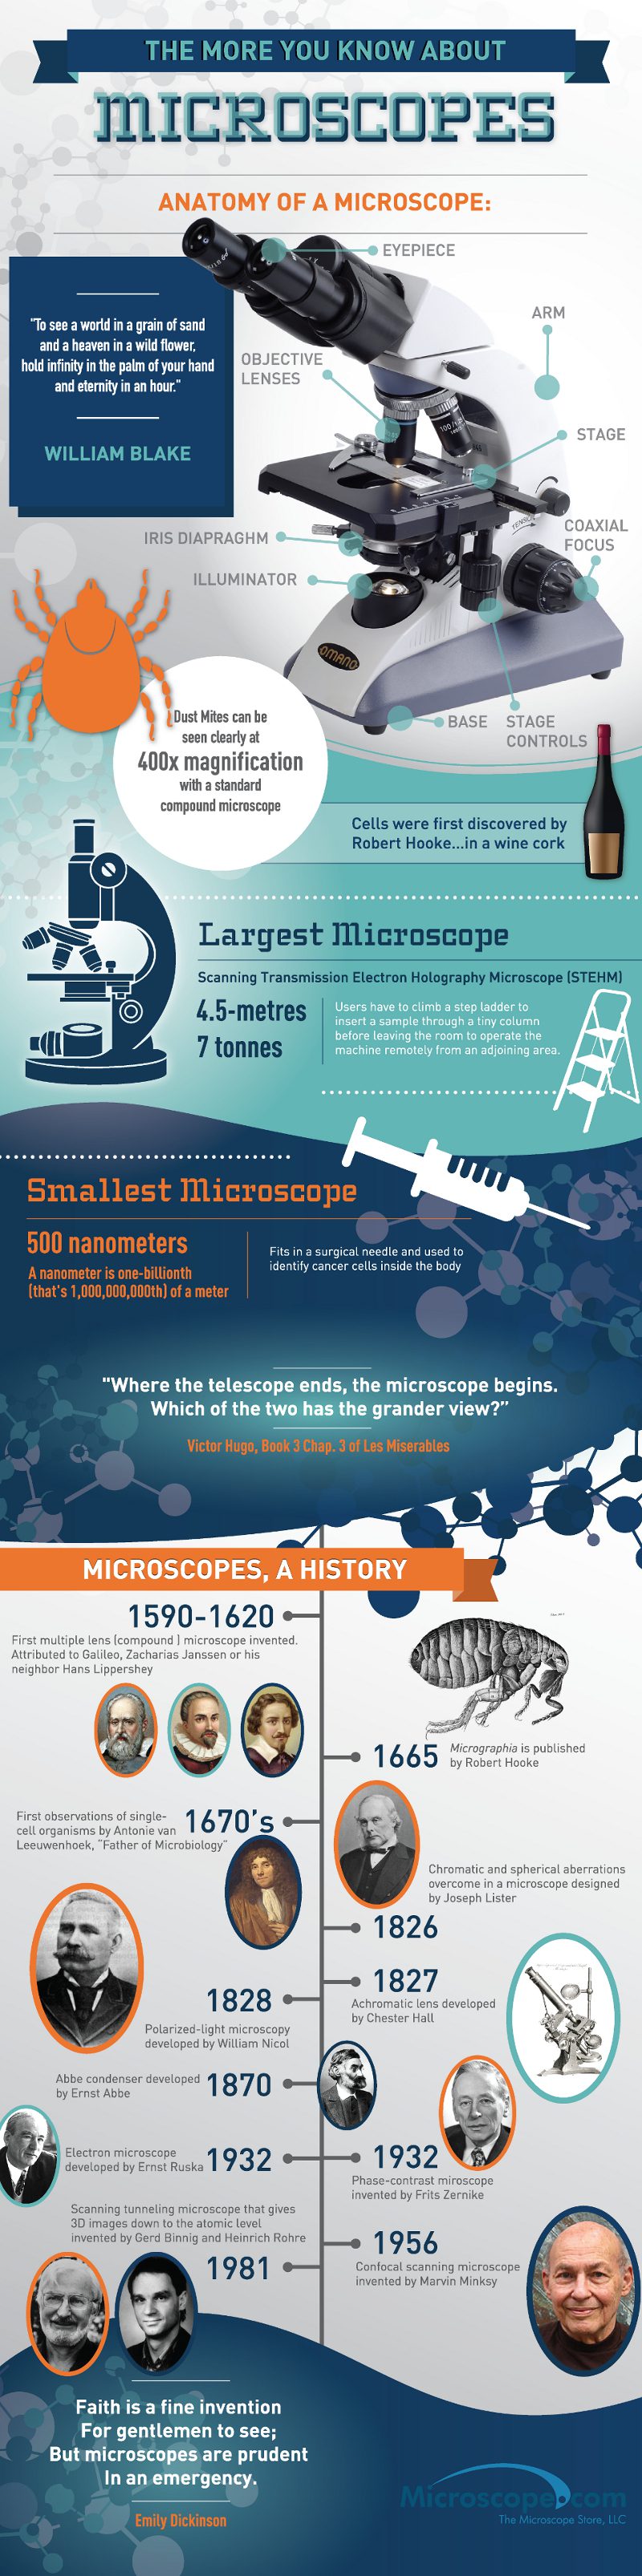 Who Invented the Compound Microscope